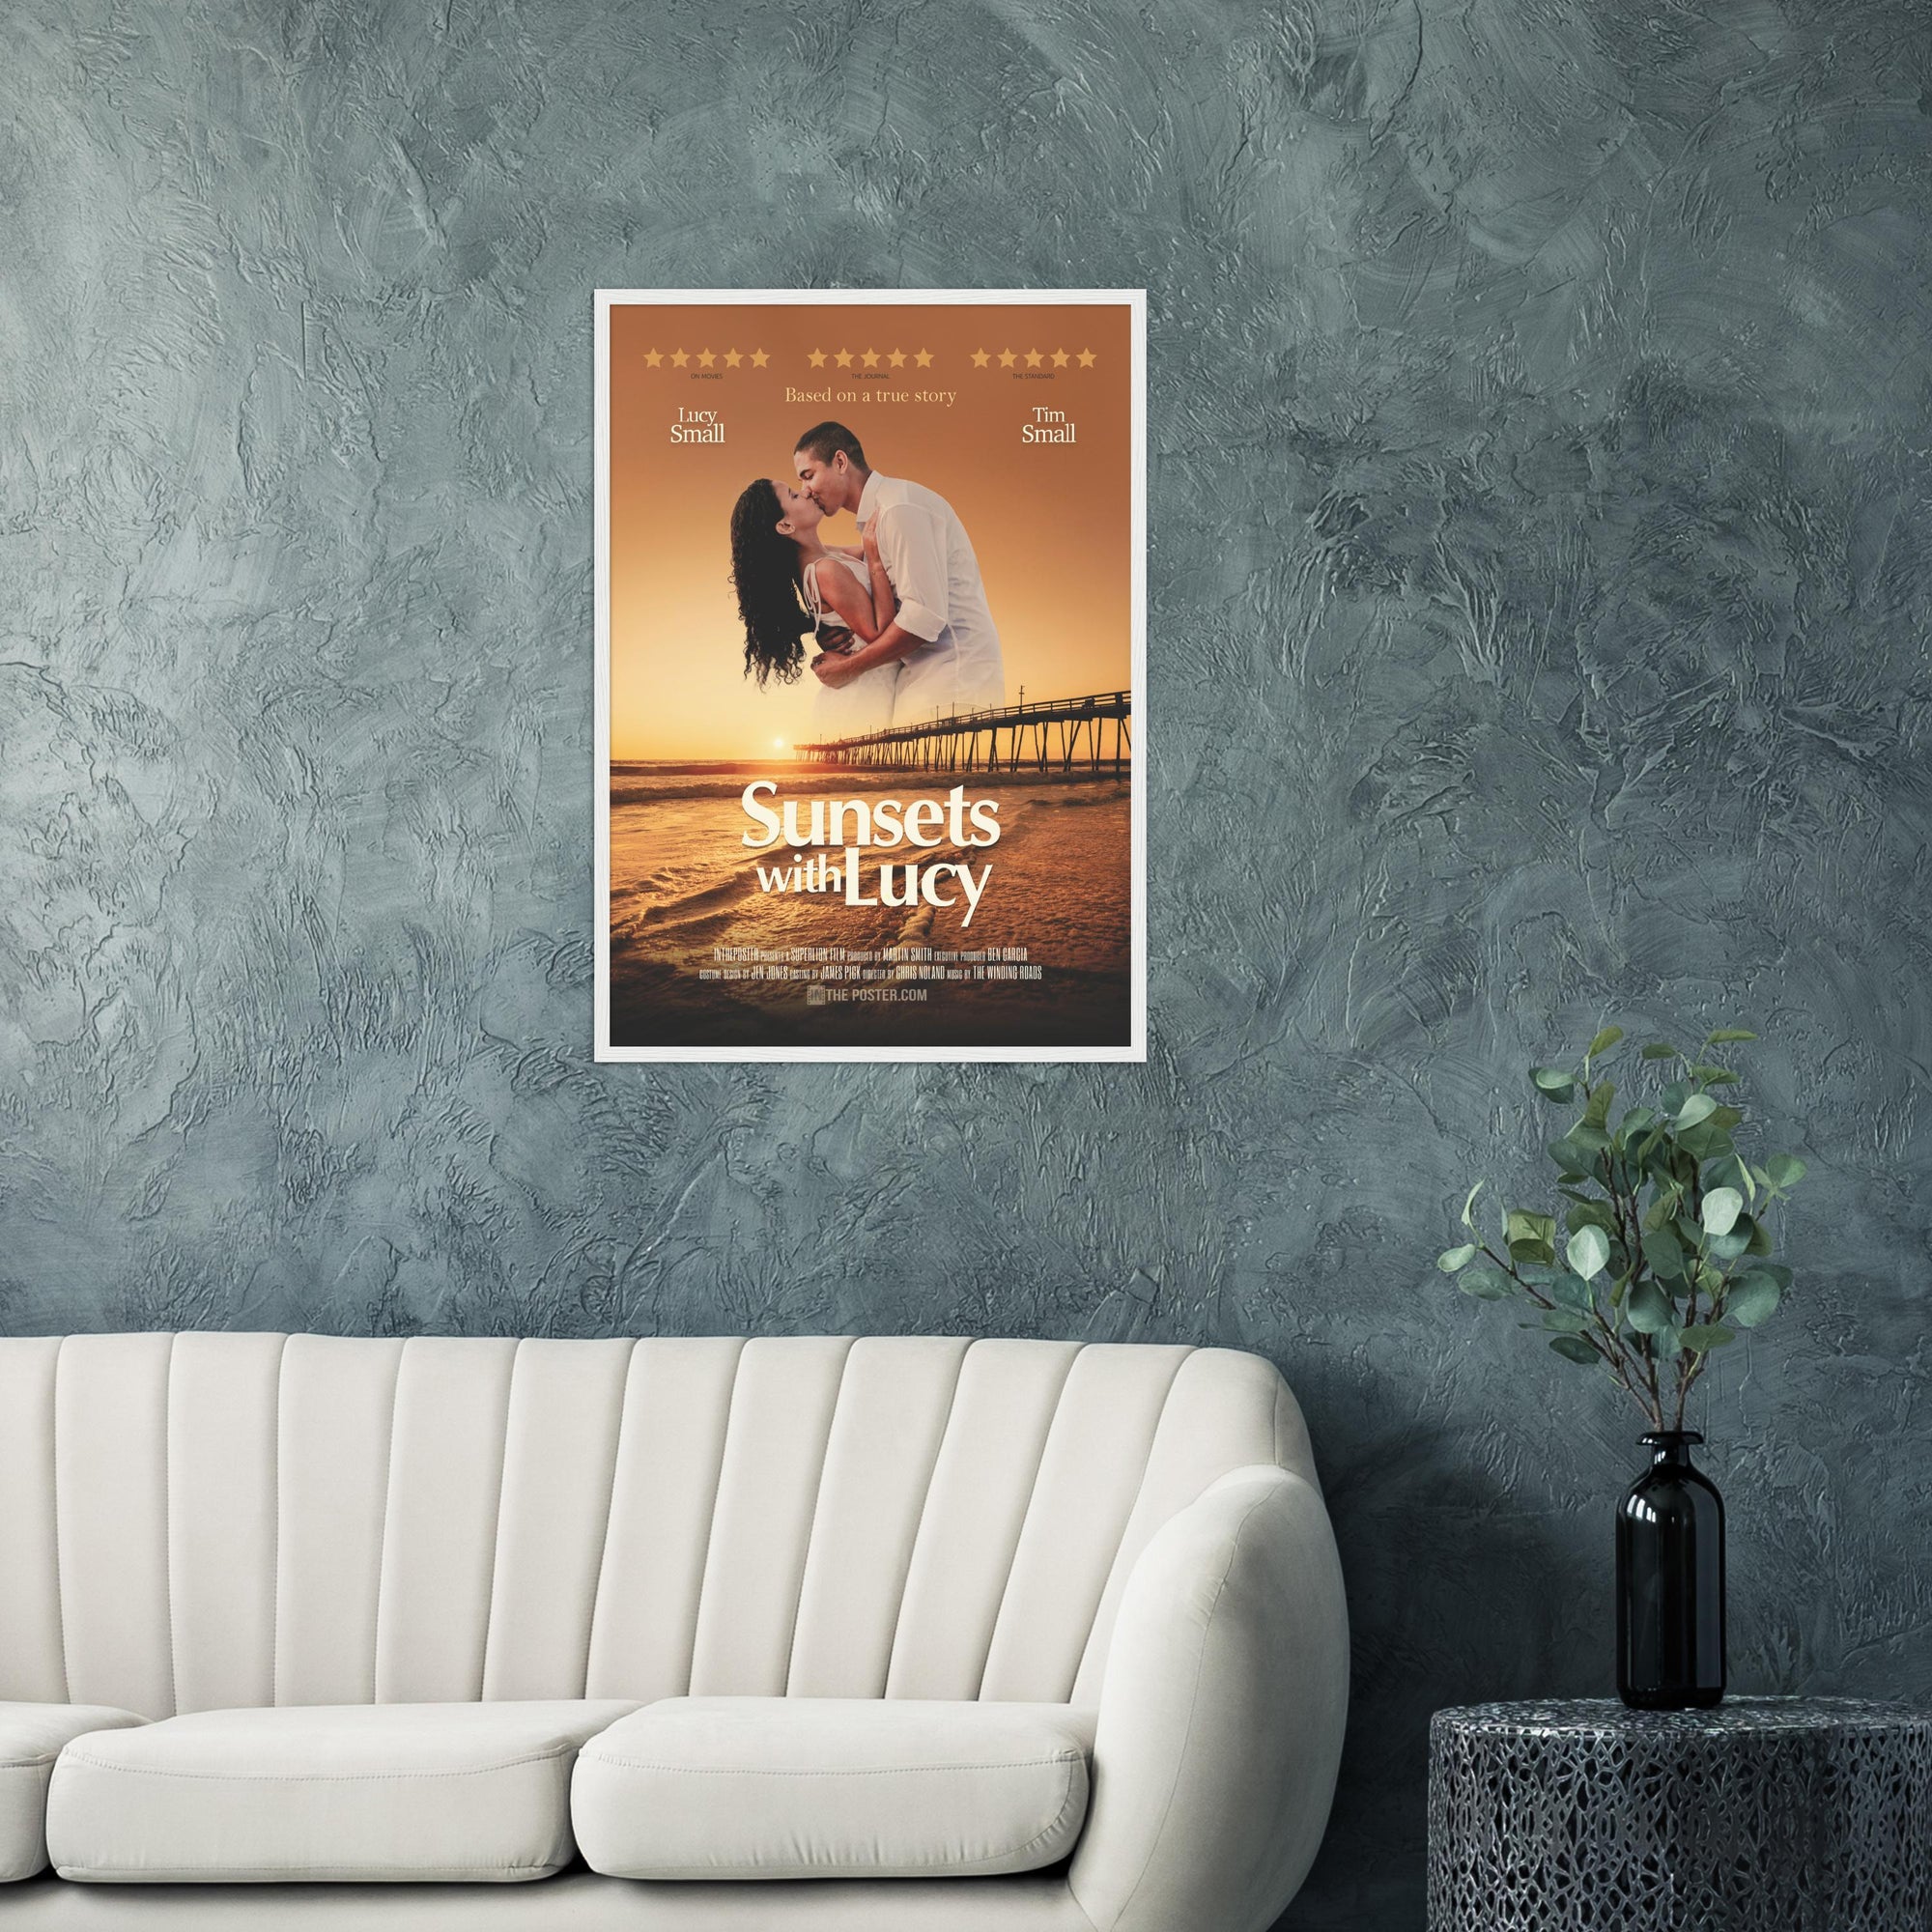 A custom movie poster in a white frame on the wall above a cream sofa